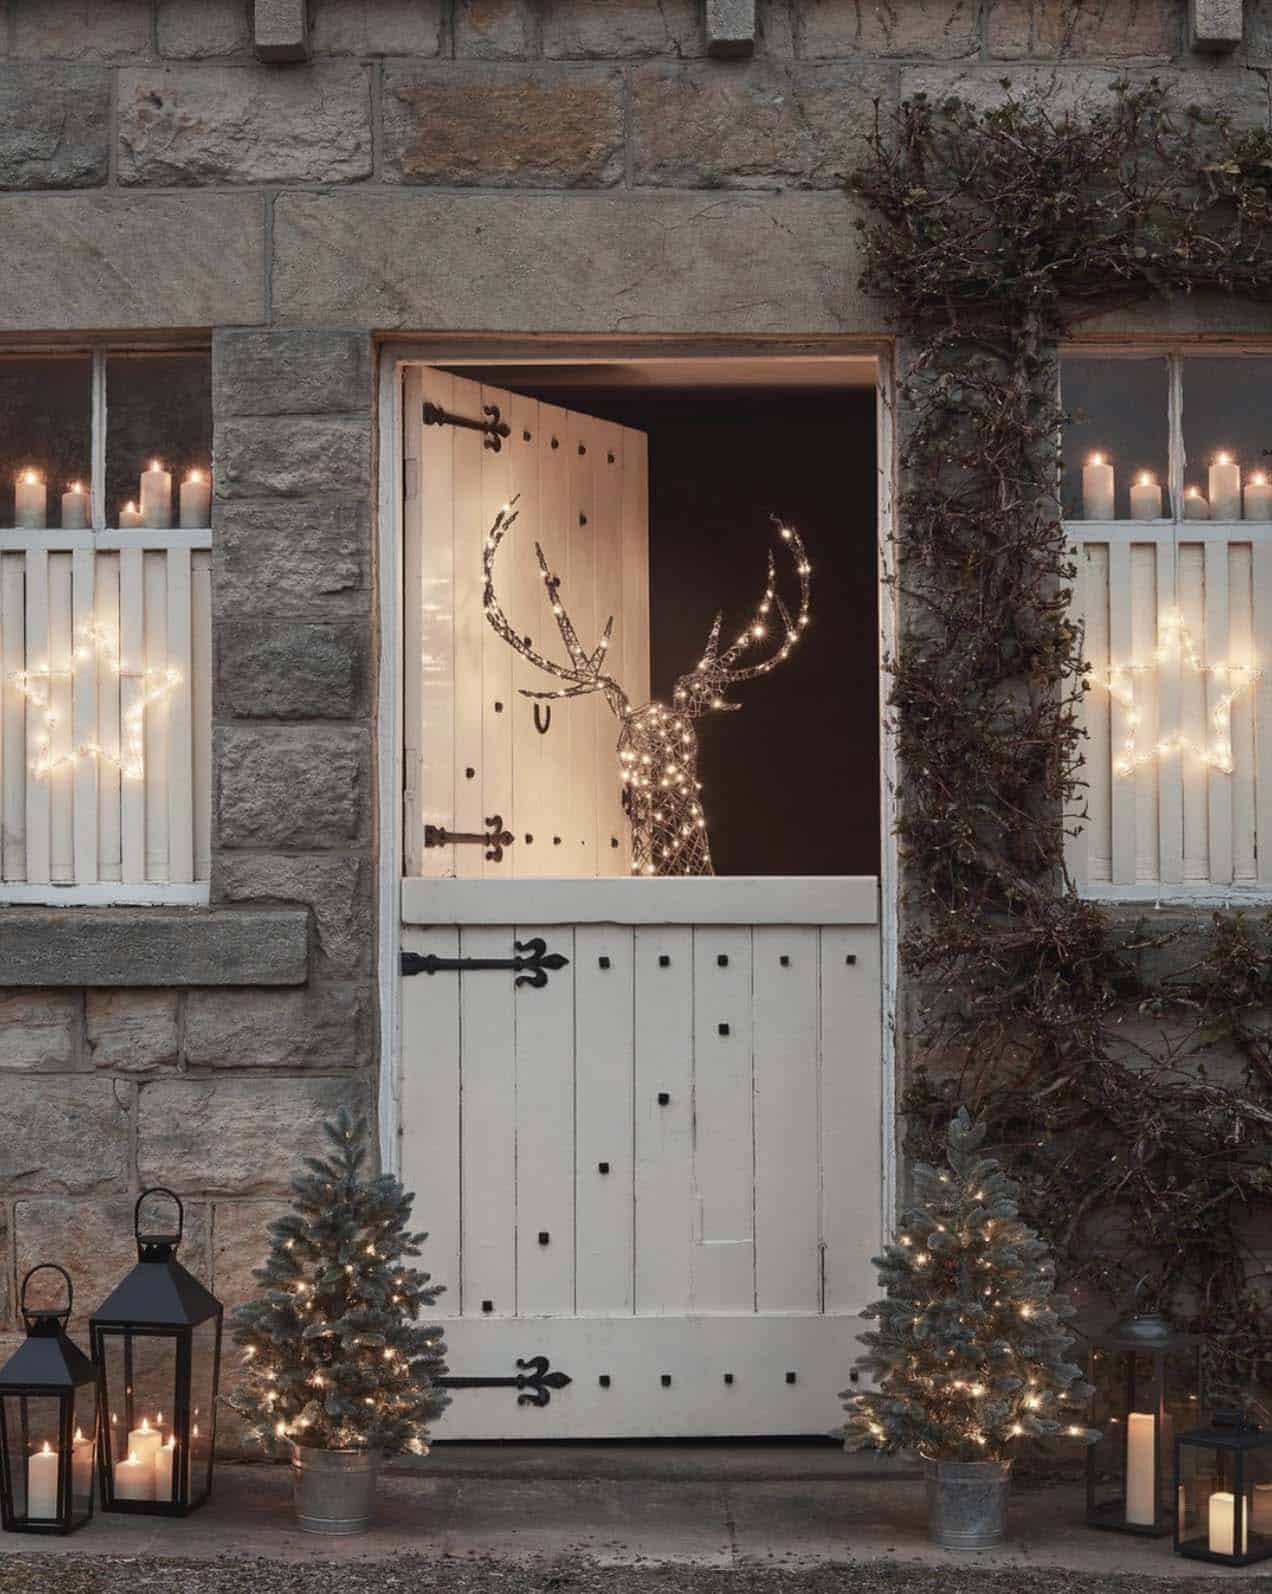 lighted-reindeer-behind-a-dutch-door-and-small-christmas-trees